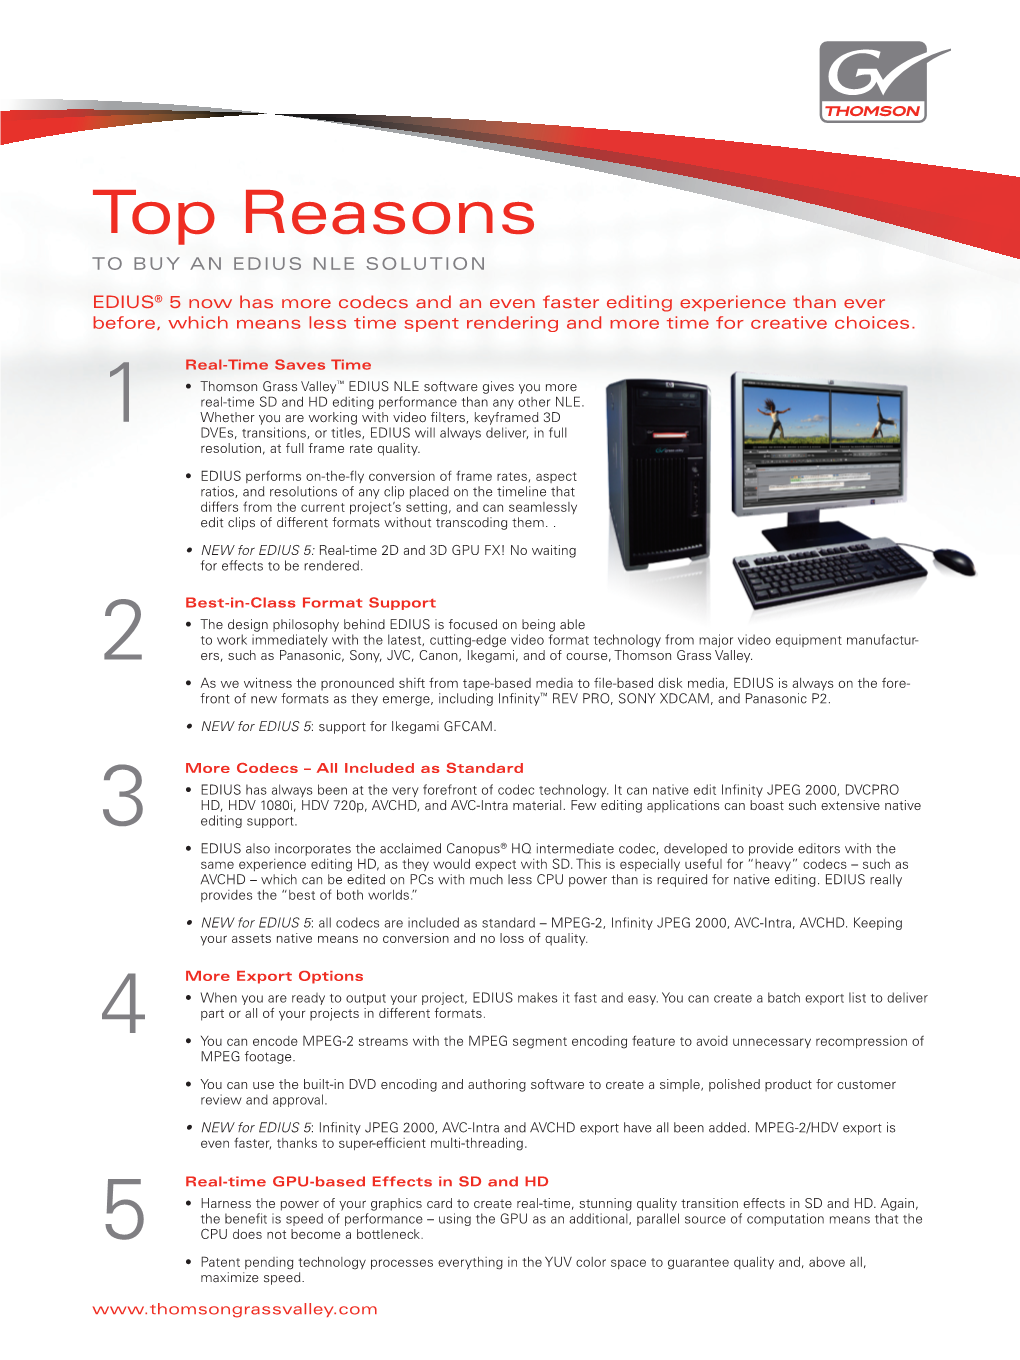 Top Reasons to Buy and EDIUS NLE Solution